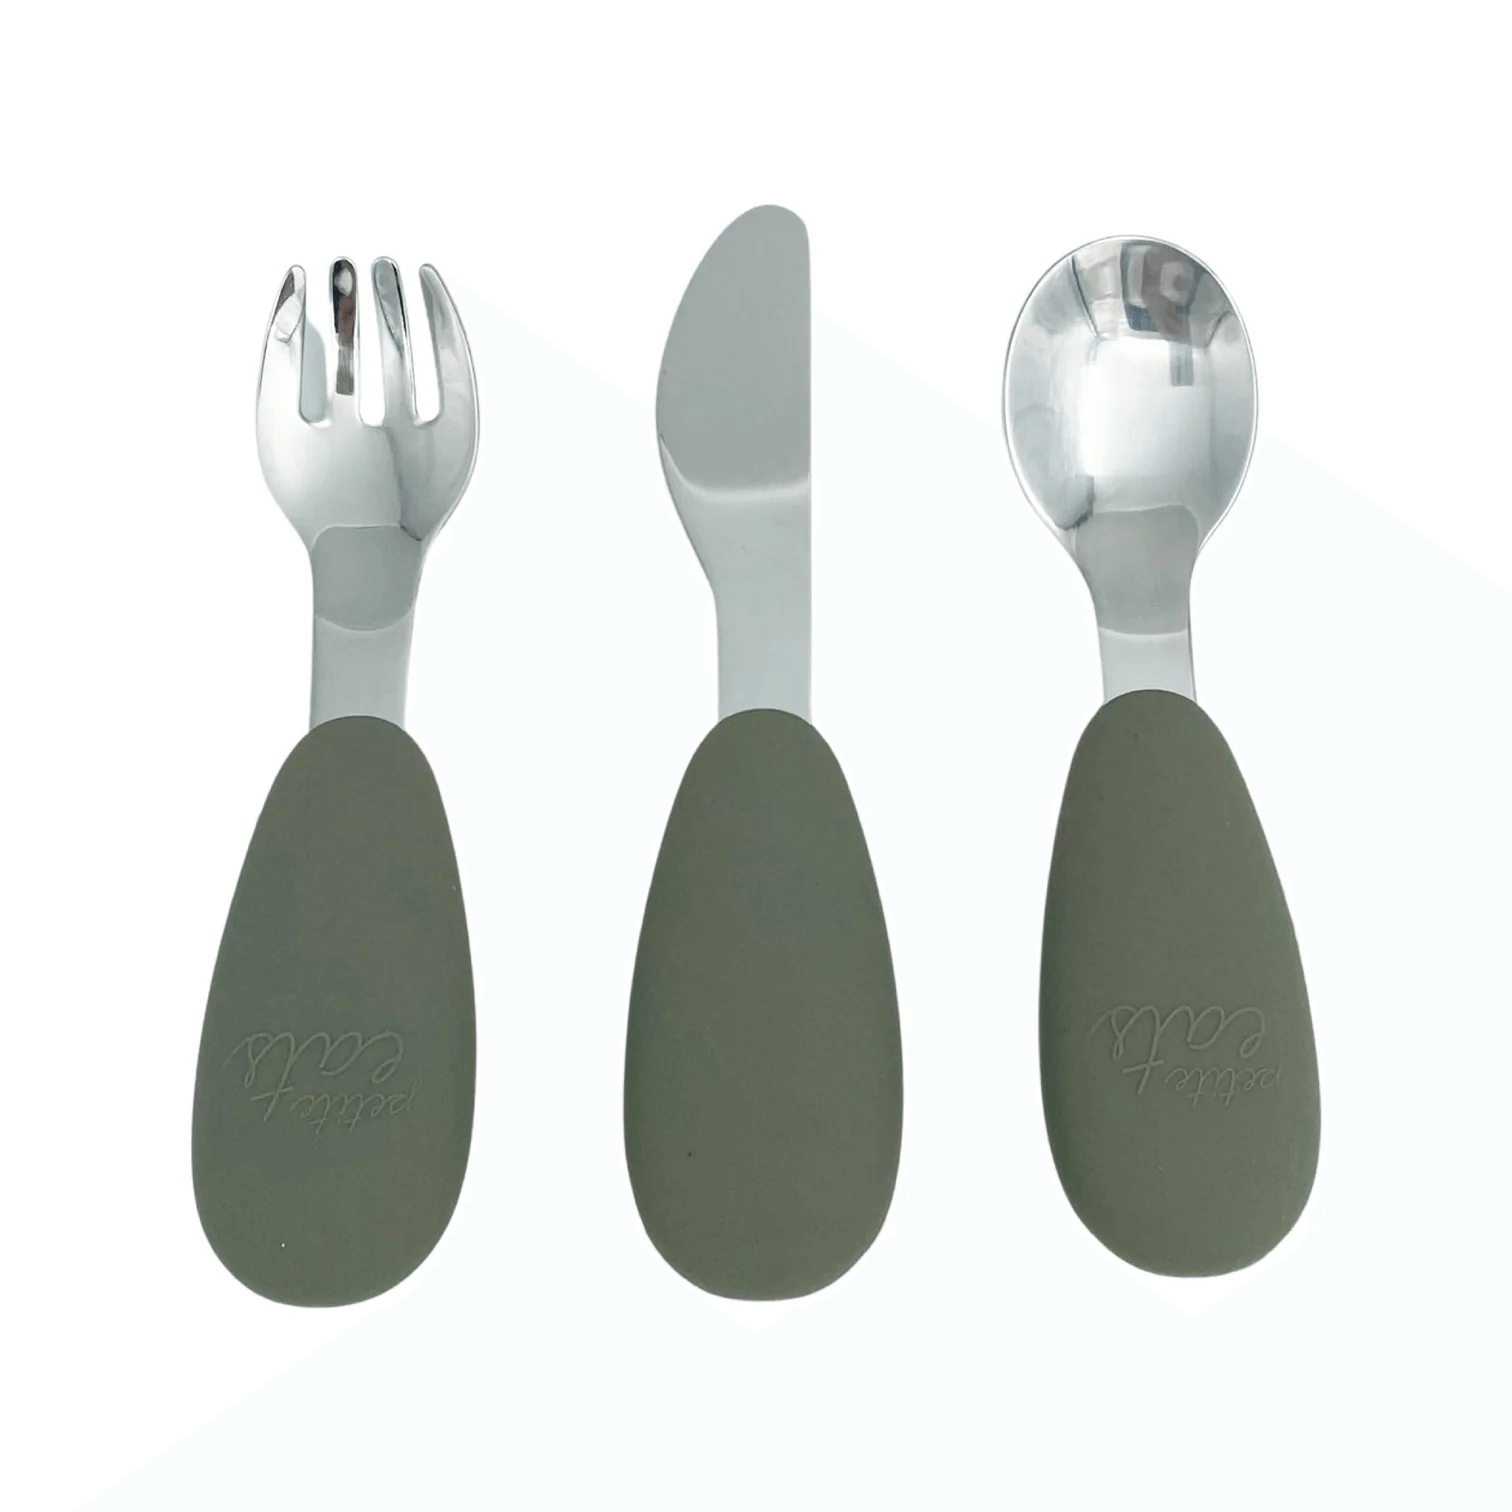 Petite Eats Full Metal Cutlery Set in Sage available at Bear & Moo